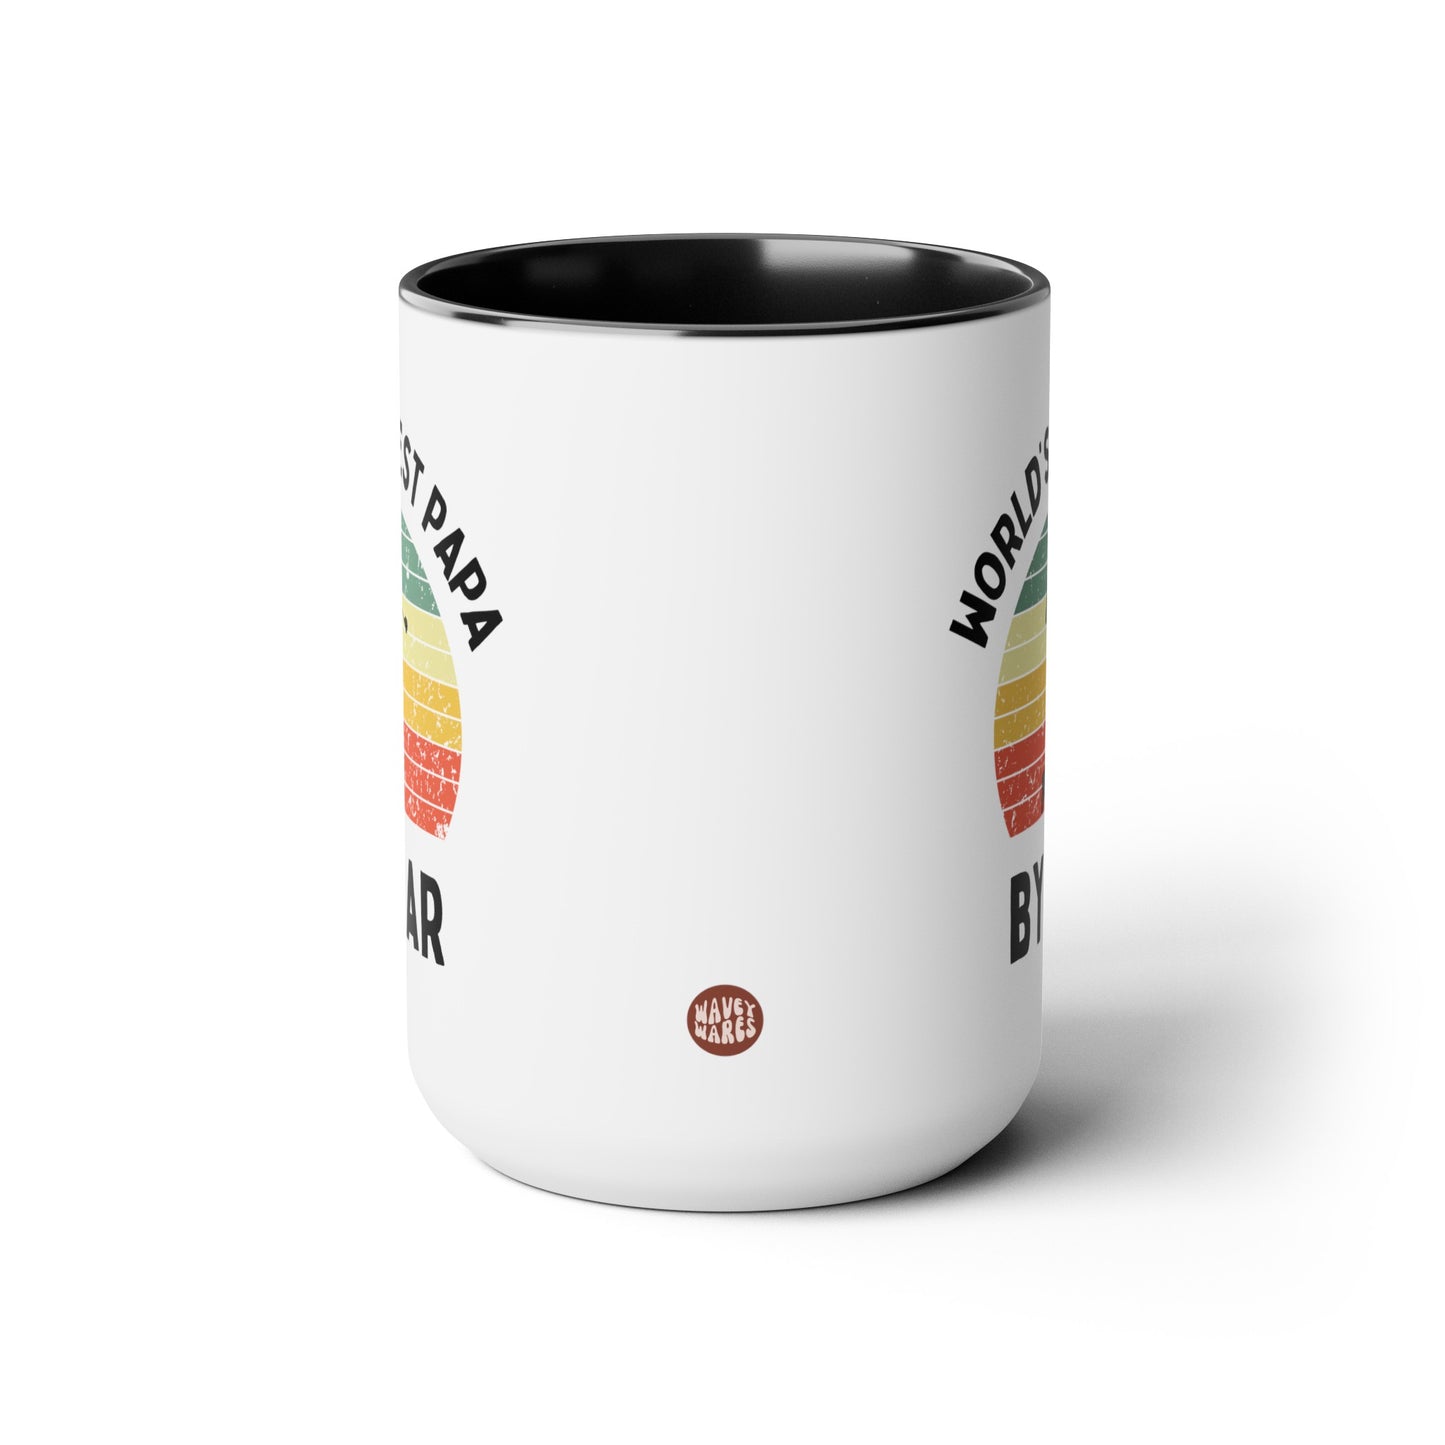 World's Best Papa By Par 15oz white with with black accent large big funny coffee mug tea cup gift for him golfer vintage sunset golf men him grandad grandpa pops father's day waveywares wavey wares wavywares wavy wares side